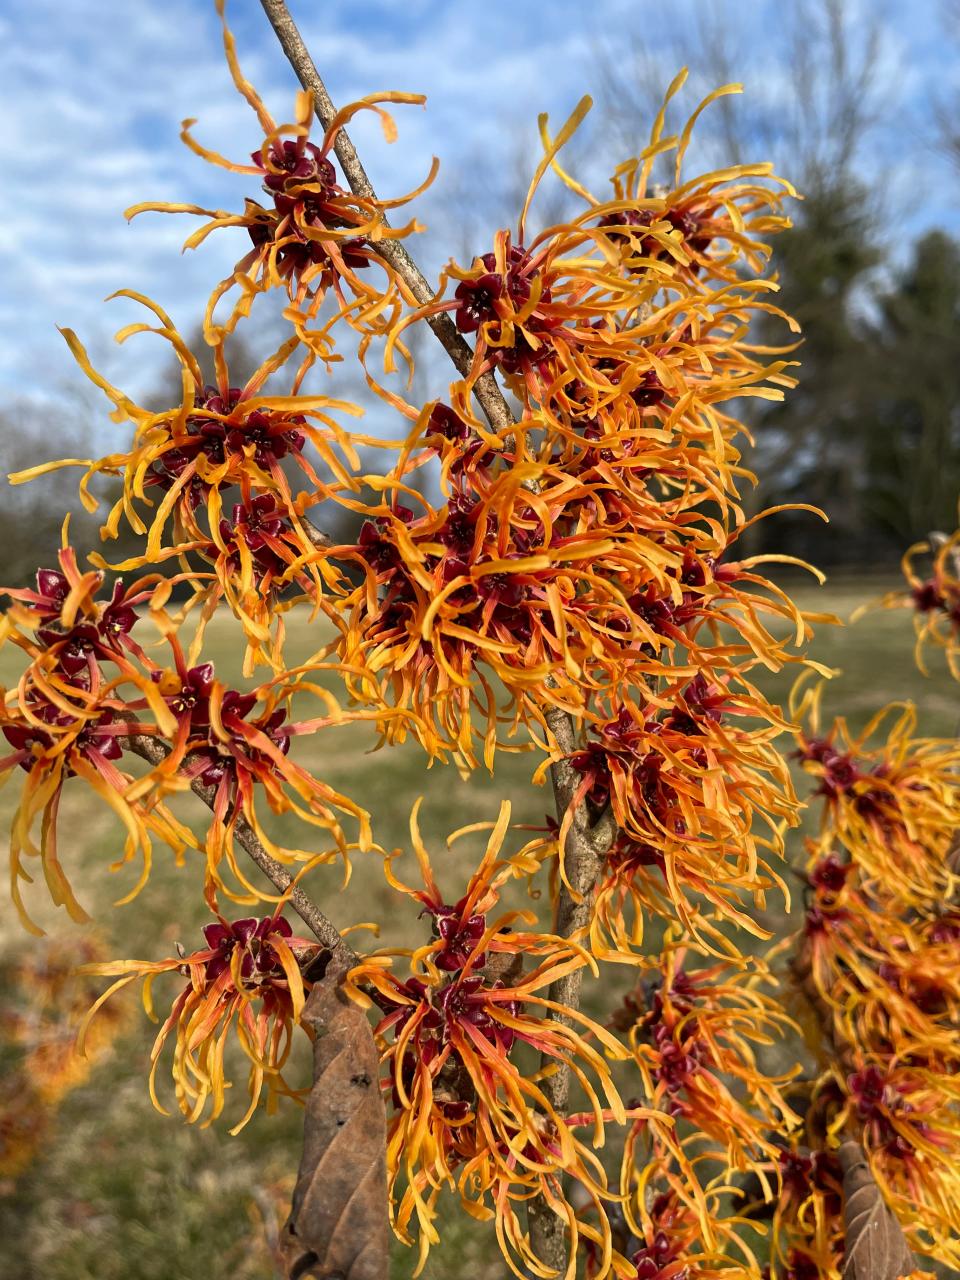 Aphrodite witch hazel is one of the best of the coppery colored witch hazels that blooms in February and March.